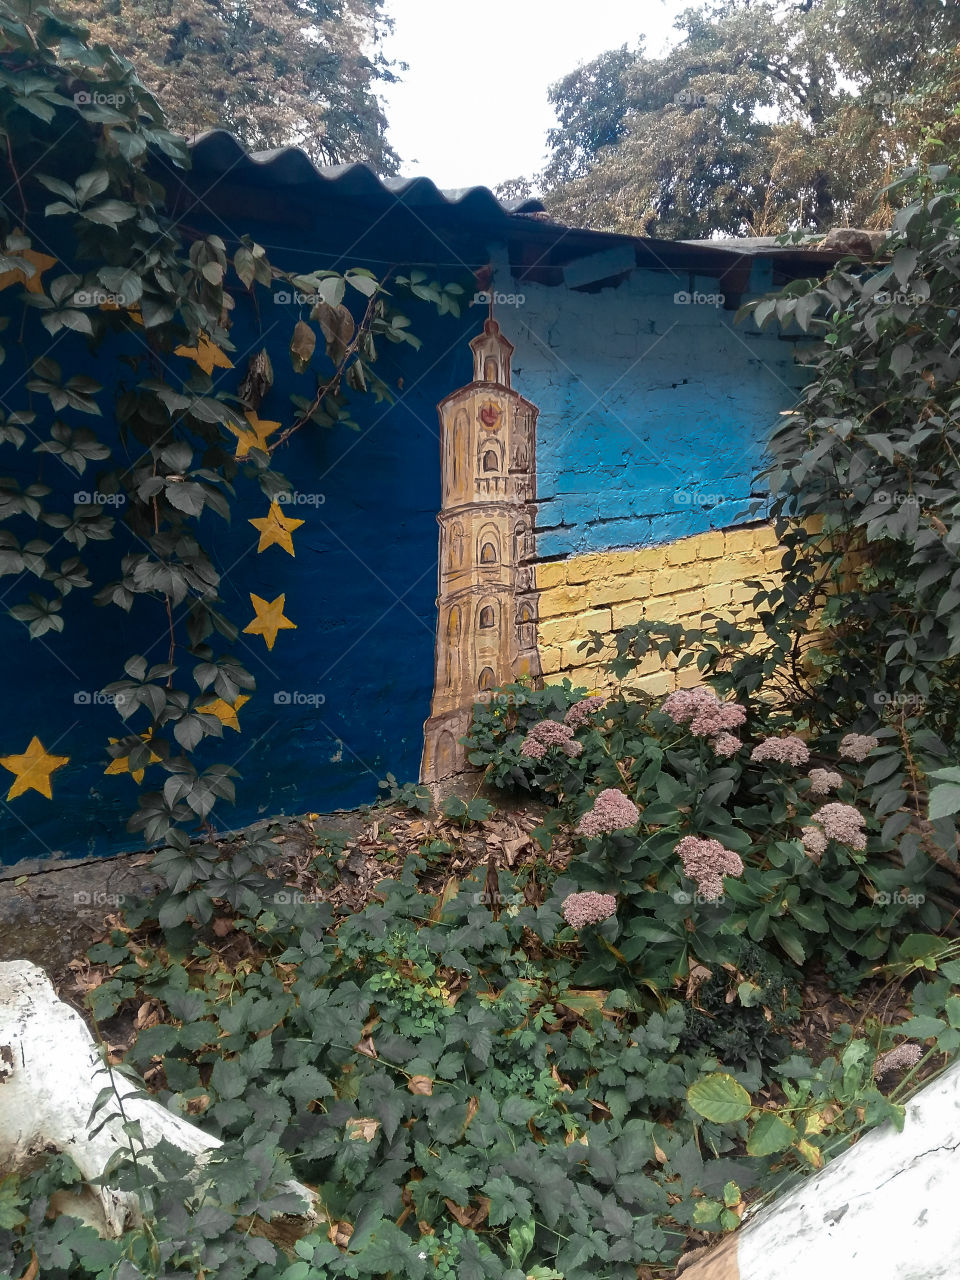 graffiti tower on a brick wall with flags of Ukraine and the European Union